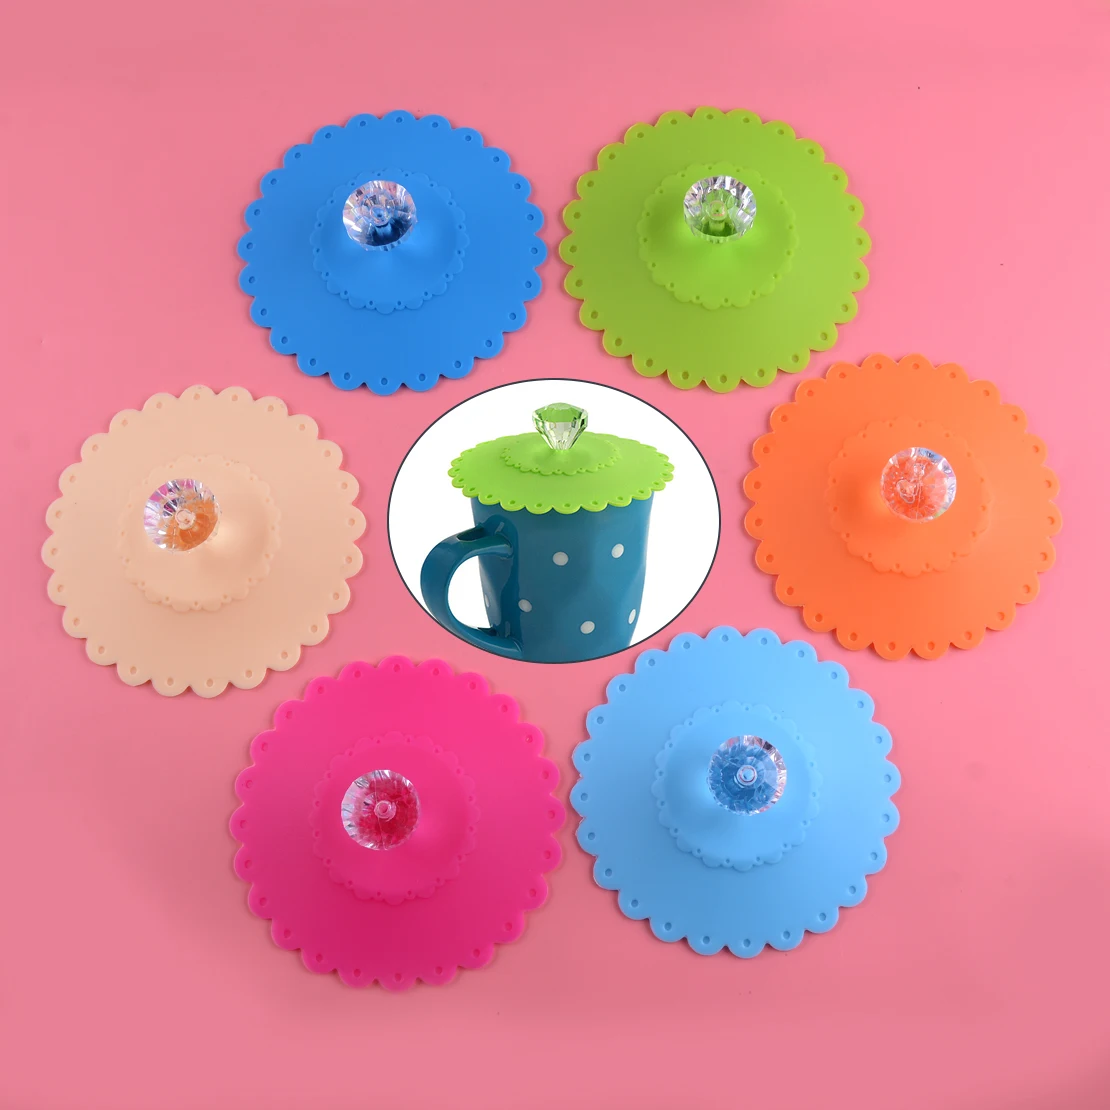 LETAOSK New 6 Set Reusable Cute Silicone Leakproof Dustproof Suction Seal Cup Lid Cap Cover Glass Drink Coffee Mug